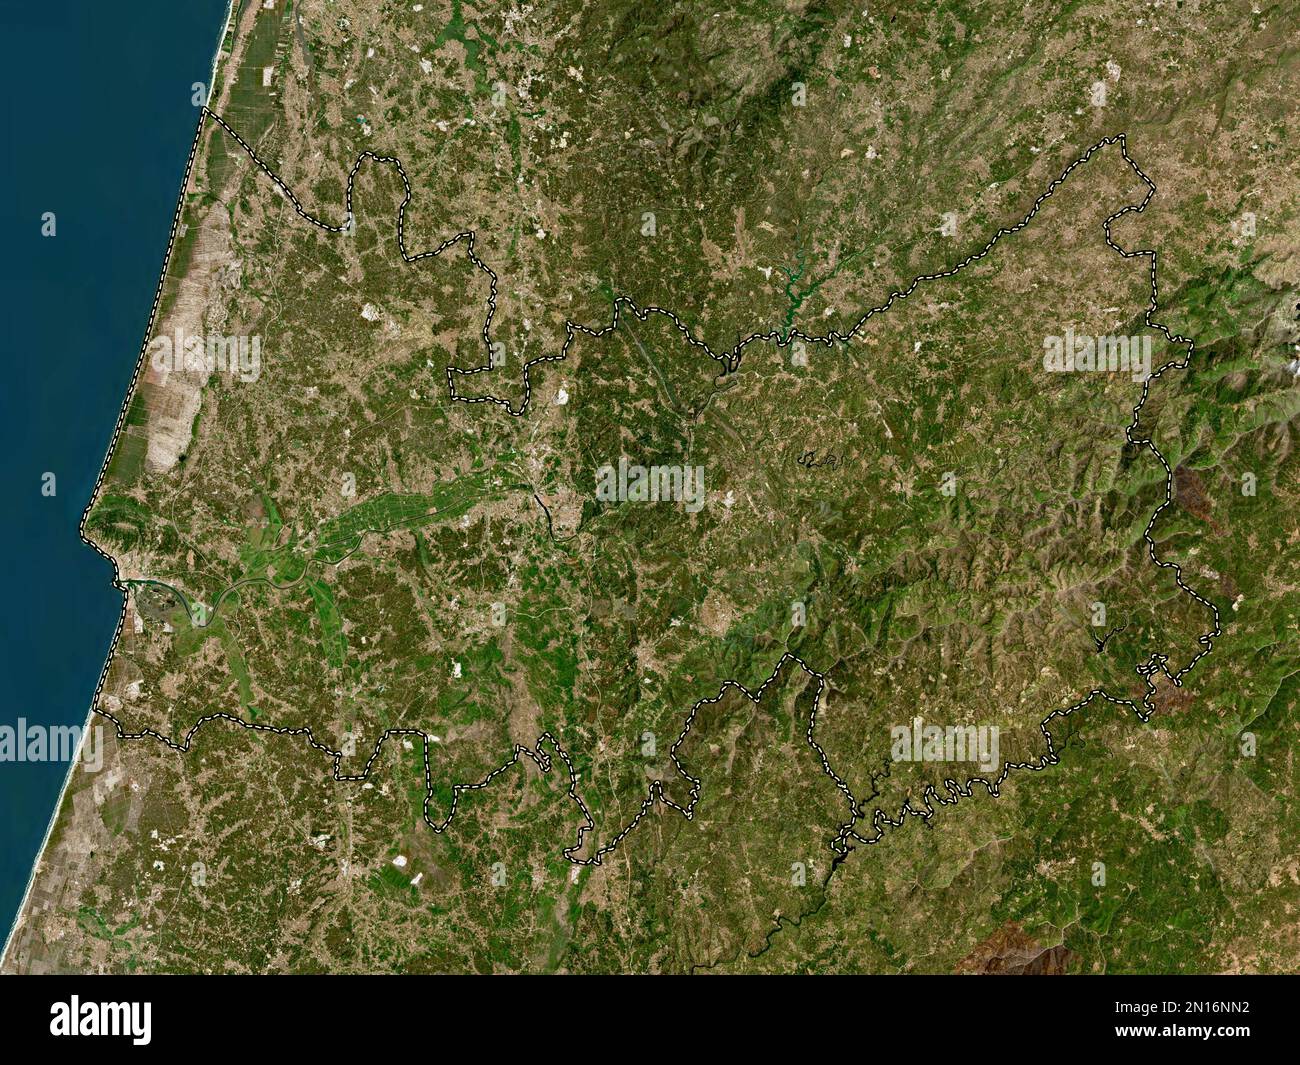 Coimbra, district of Portugal. High resolution satellite map Stock Photo